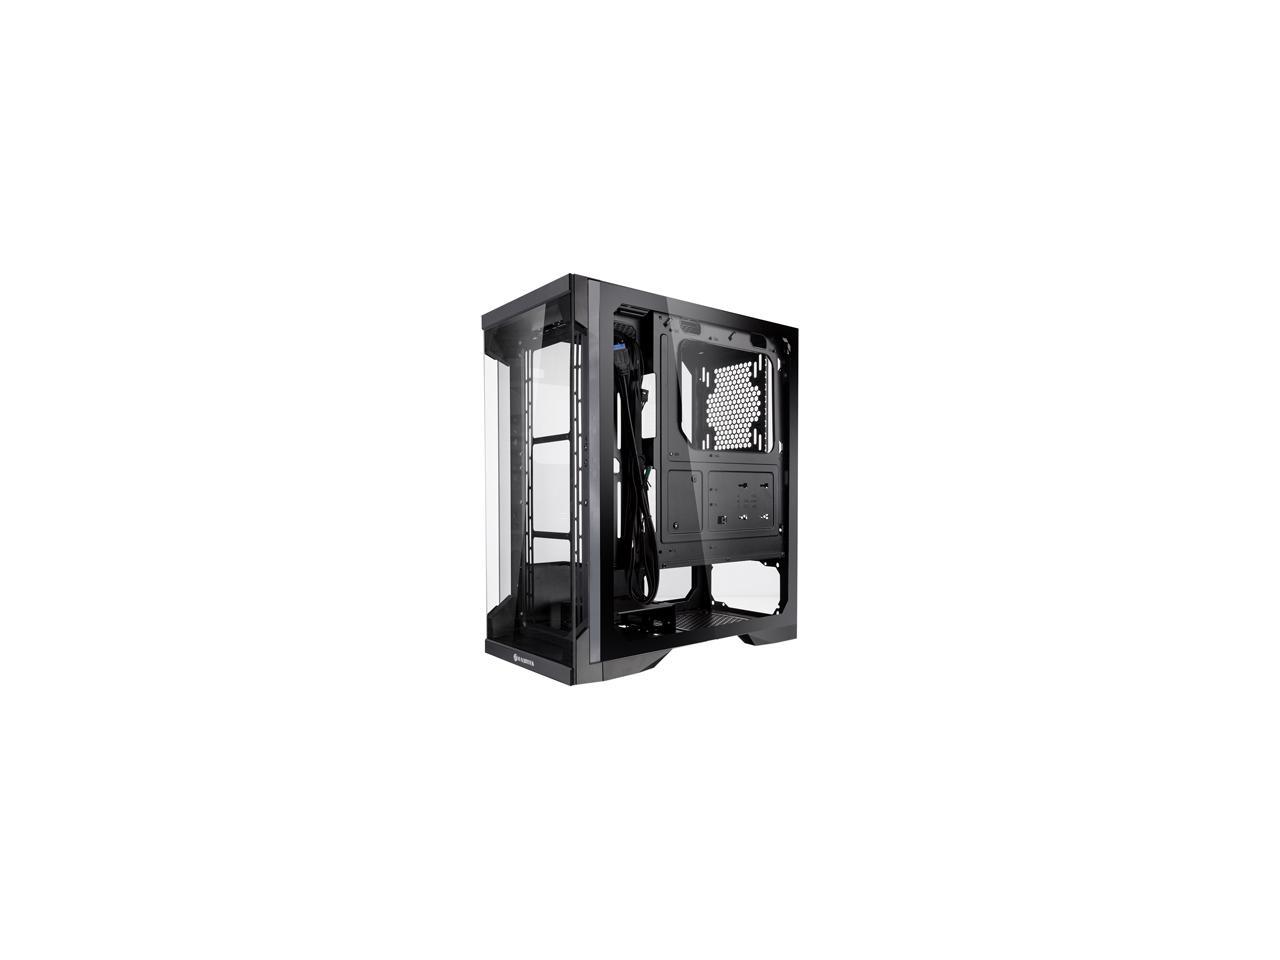 RAIJINTEK SILENOS, an ATX Tower Designed to Install High Air Flow 200mm Fans and a Clean Transparent Front and Side Tempered glass (4.0mm), Supports VGA length up to 320mm, 2x3.5 HDDs & 6x2.5 HDD/SSDs